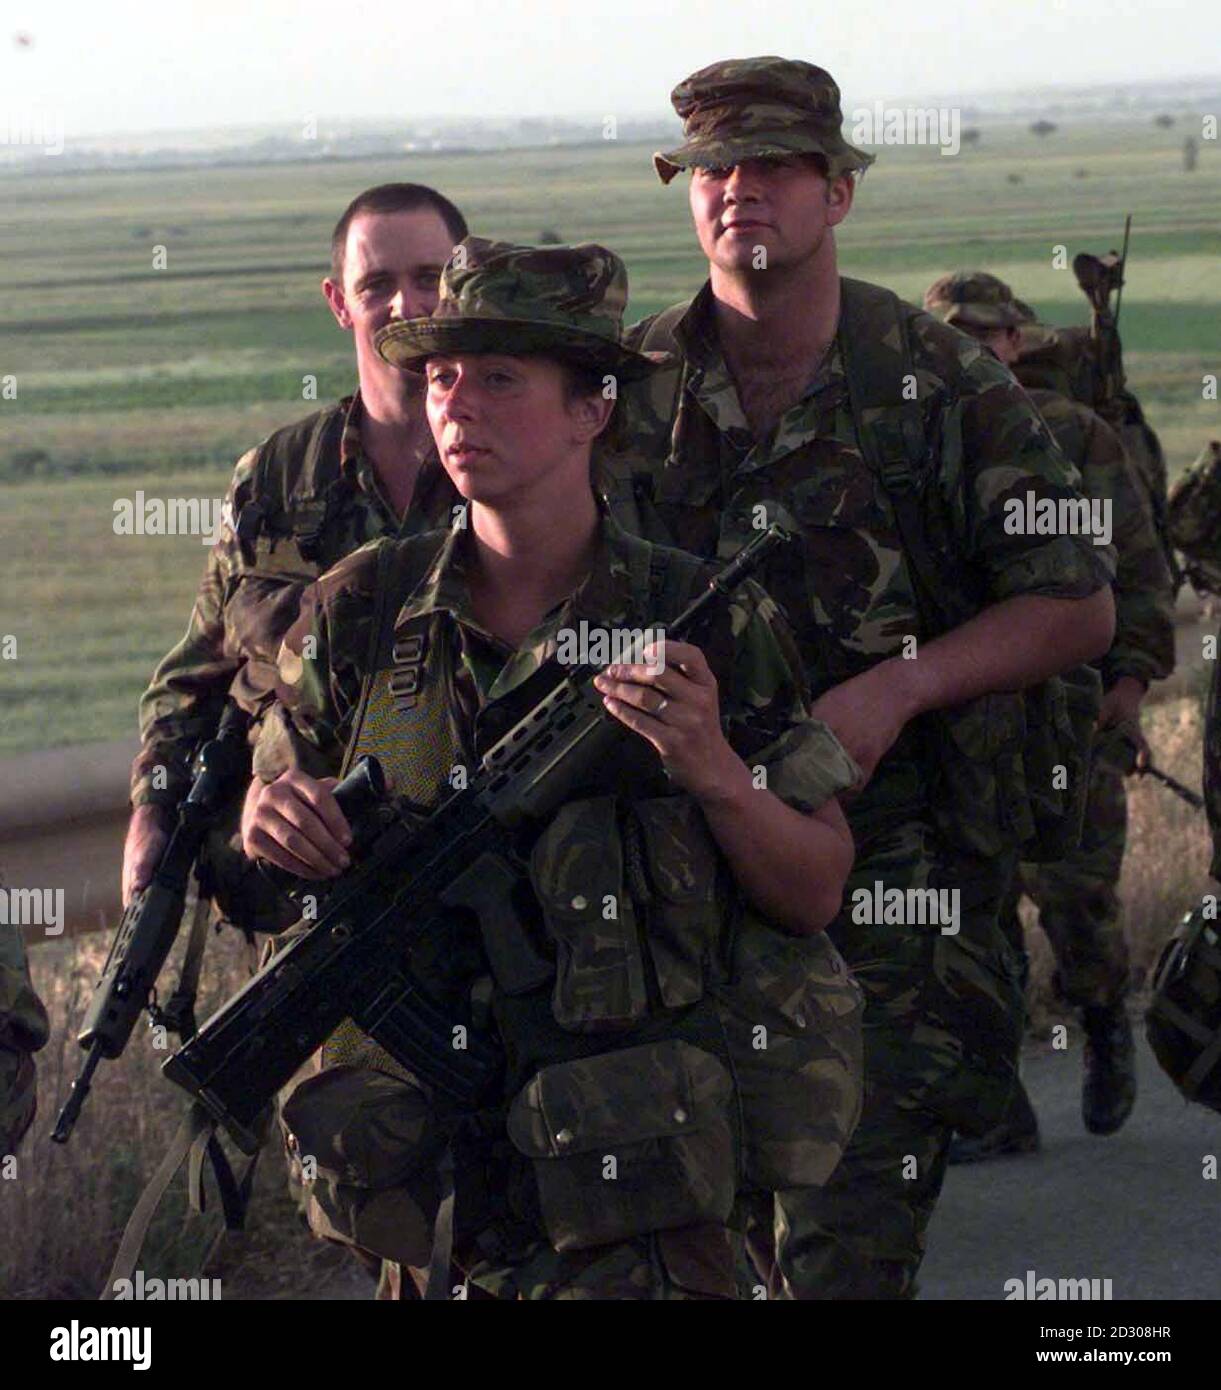 A young woman soldier marches with troops on the outskirts of Pristina, the capital of Kosovo. 24/12/00: The Army has moved a step closer towards allowing women to serve in frontline combat roles. * Field trials to assess whether women could perform in combat alongside men found that the two sexes interacted well in almost all situations, according to a report in The Observer. The tests, conducted on Salisbury Plain during the autumn, are part of a three-phase programme which will determine whether the barrier to women serving on the frontline should be removed. A report will be presented Stock Photo